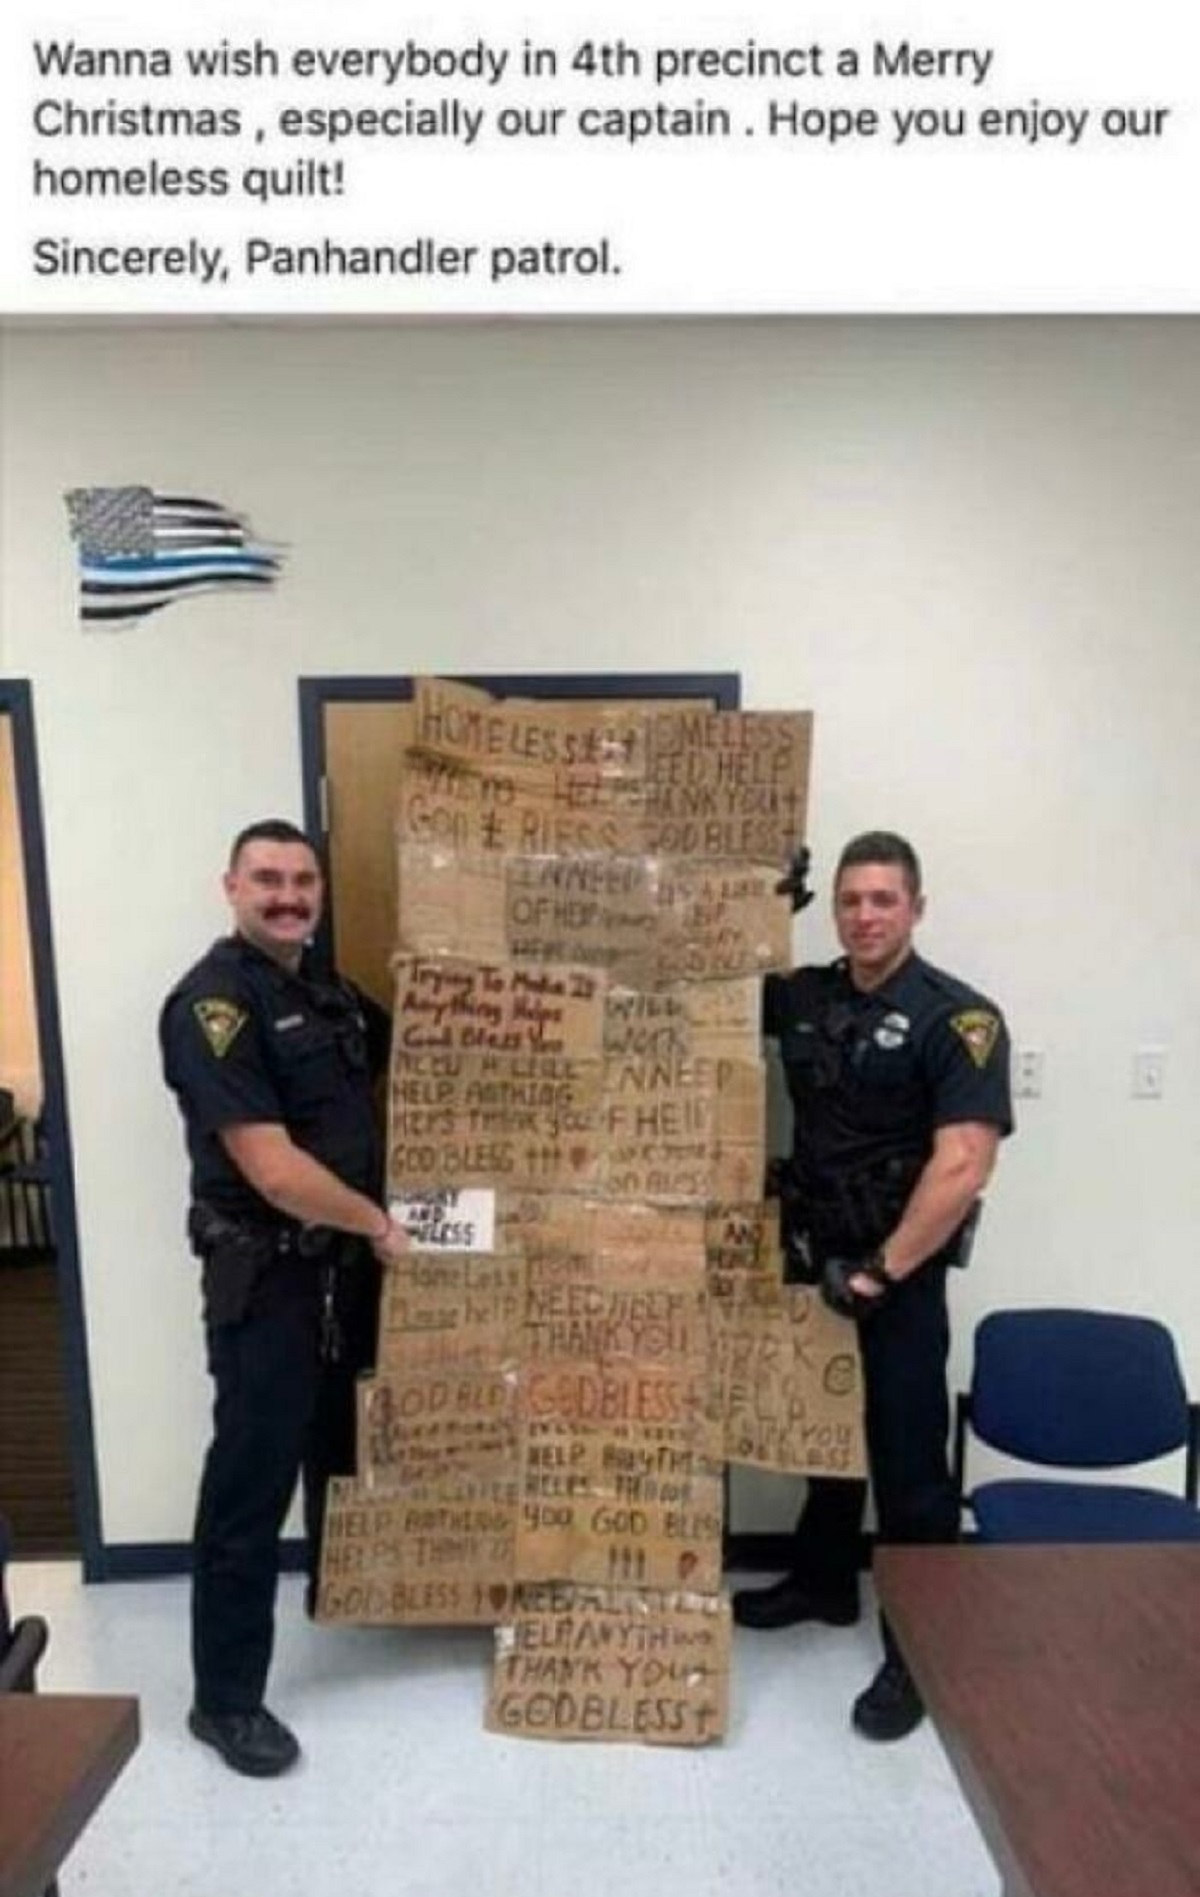 cringe pics - homeless quilt - Wanna wish everybody in 4th precinct a Merry Christmas, especially our captain. Hope you enjoy our homeless quilt! Sincerely, Panhandler patrol. Home Les Sa Son & Riess Of Ho Trying To Modia 21 Anything Hips Tomeless Eed Hel